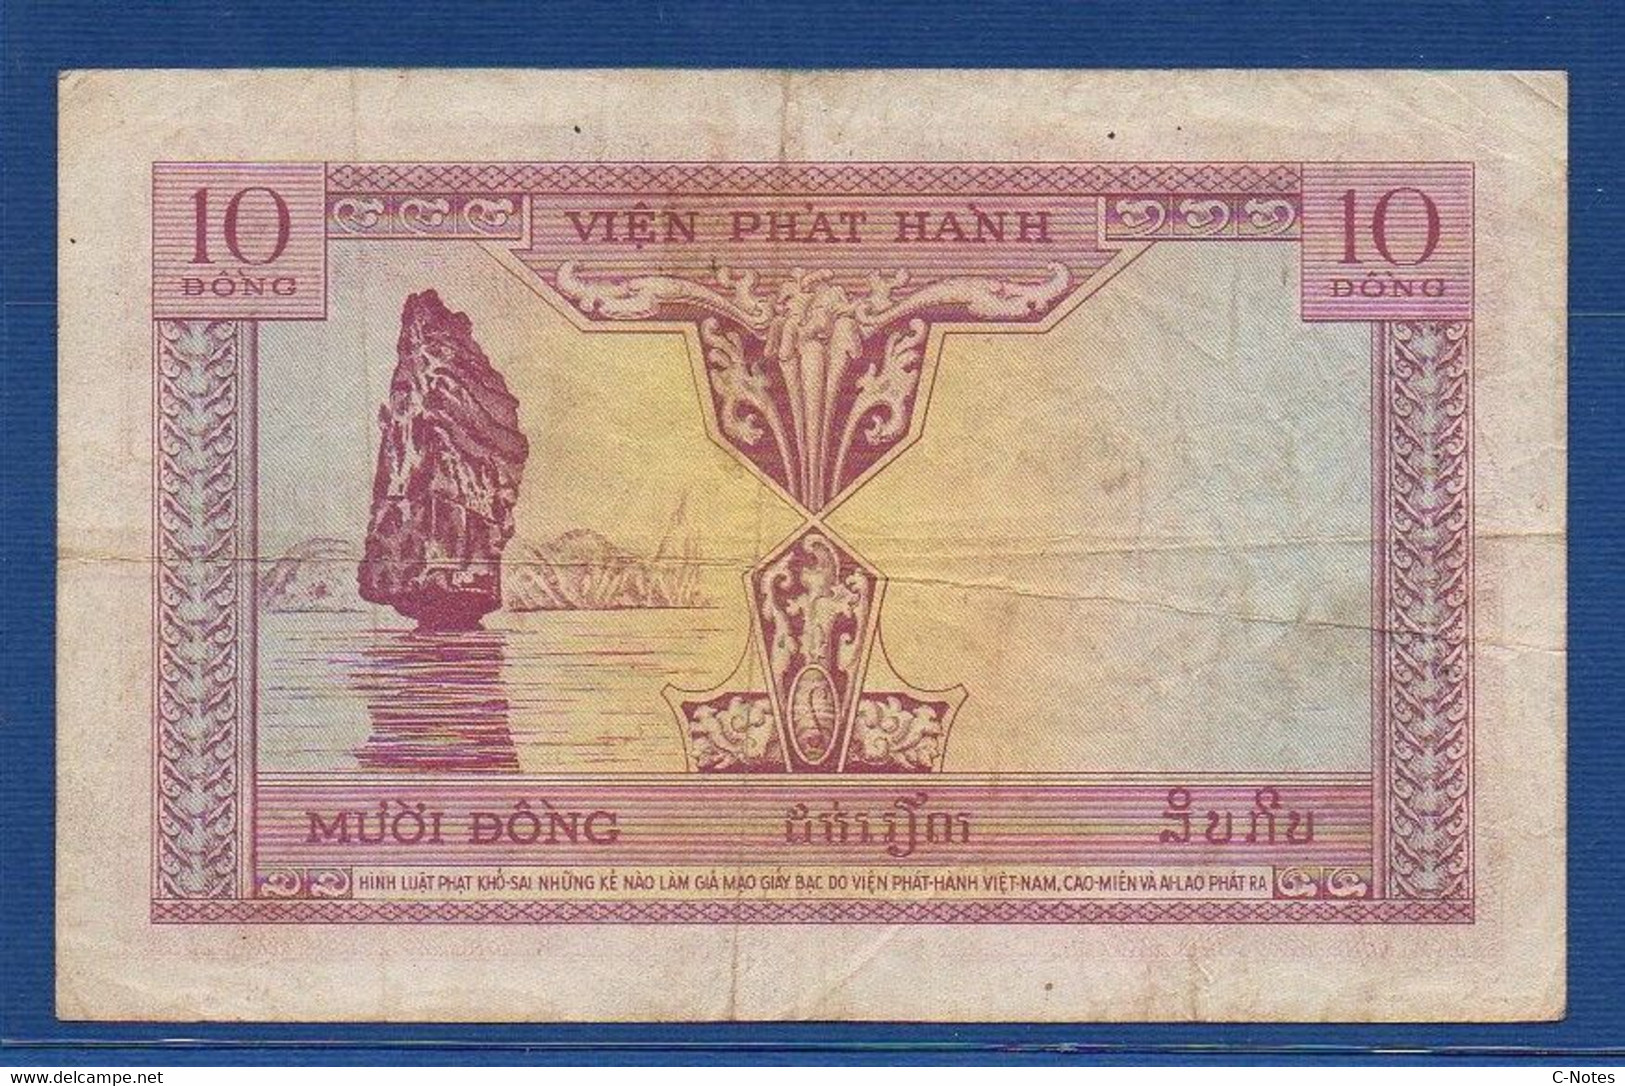 FRENCH INDOCHINA - P.107 –  10 Piastres / Dong ND (1953) F/VF, Serie R18 73957 - Indocina